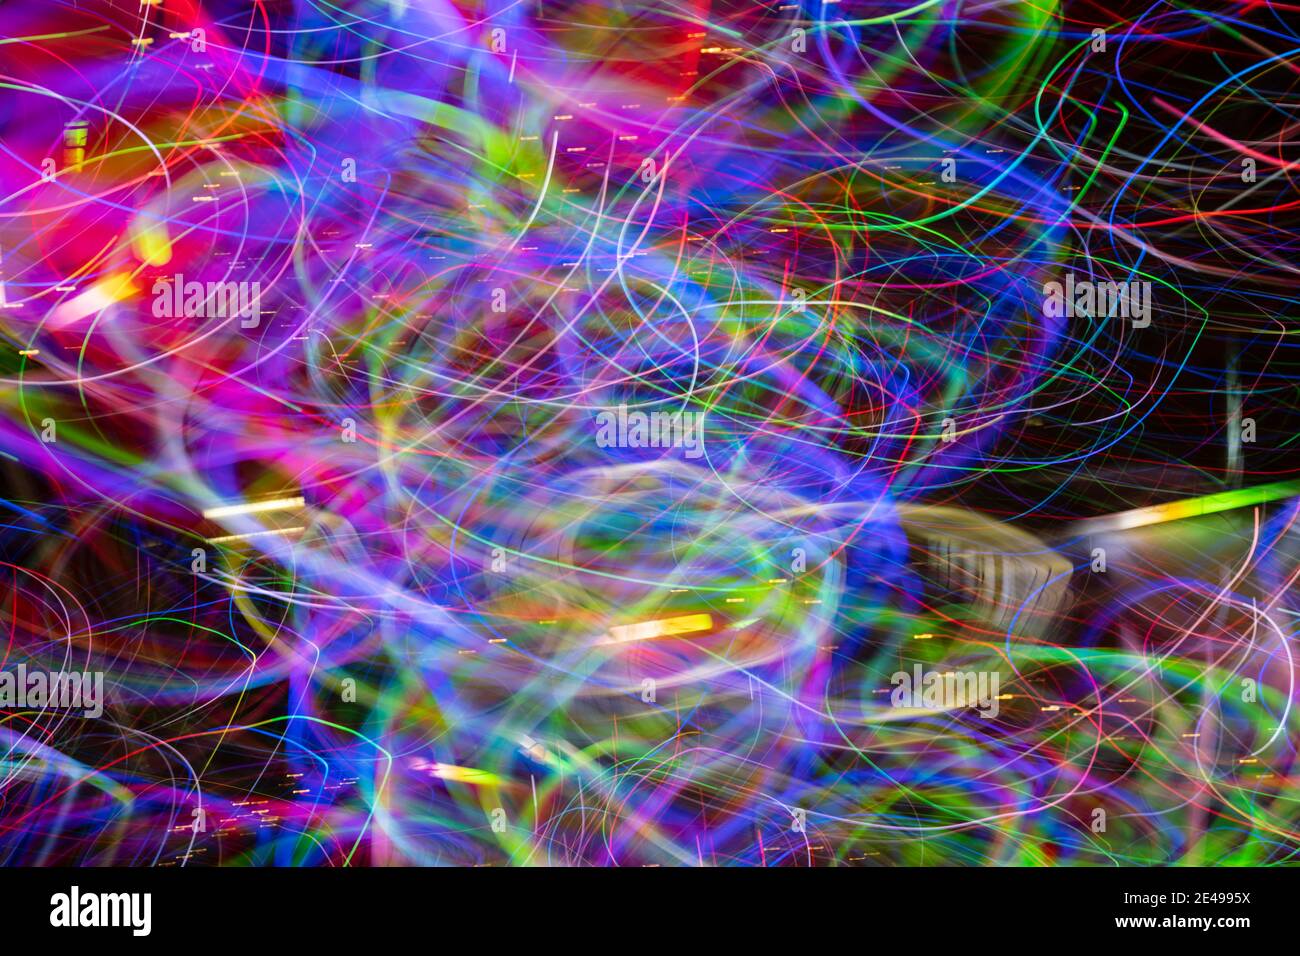 Layered spectrum of bright chaotic colors in light effect created by LED lights photographed outdoors at night. Stock Photo